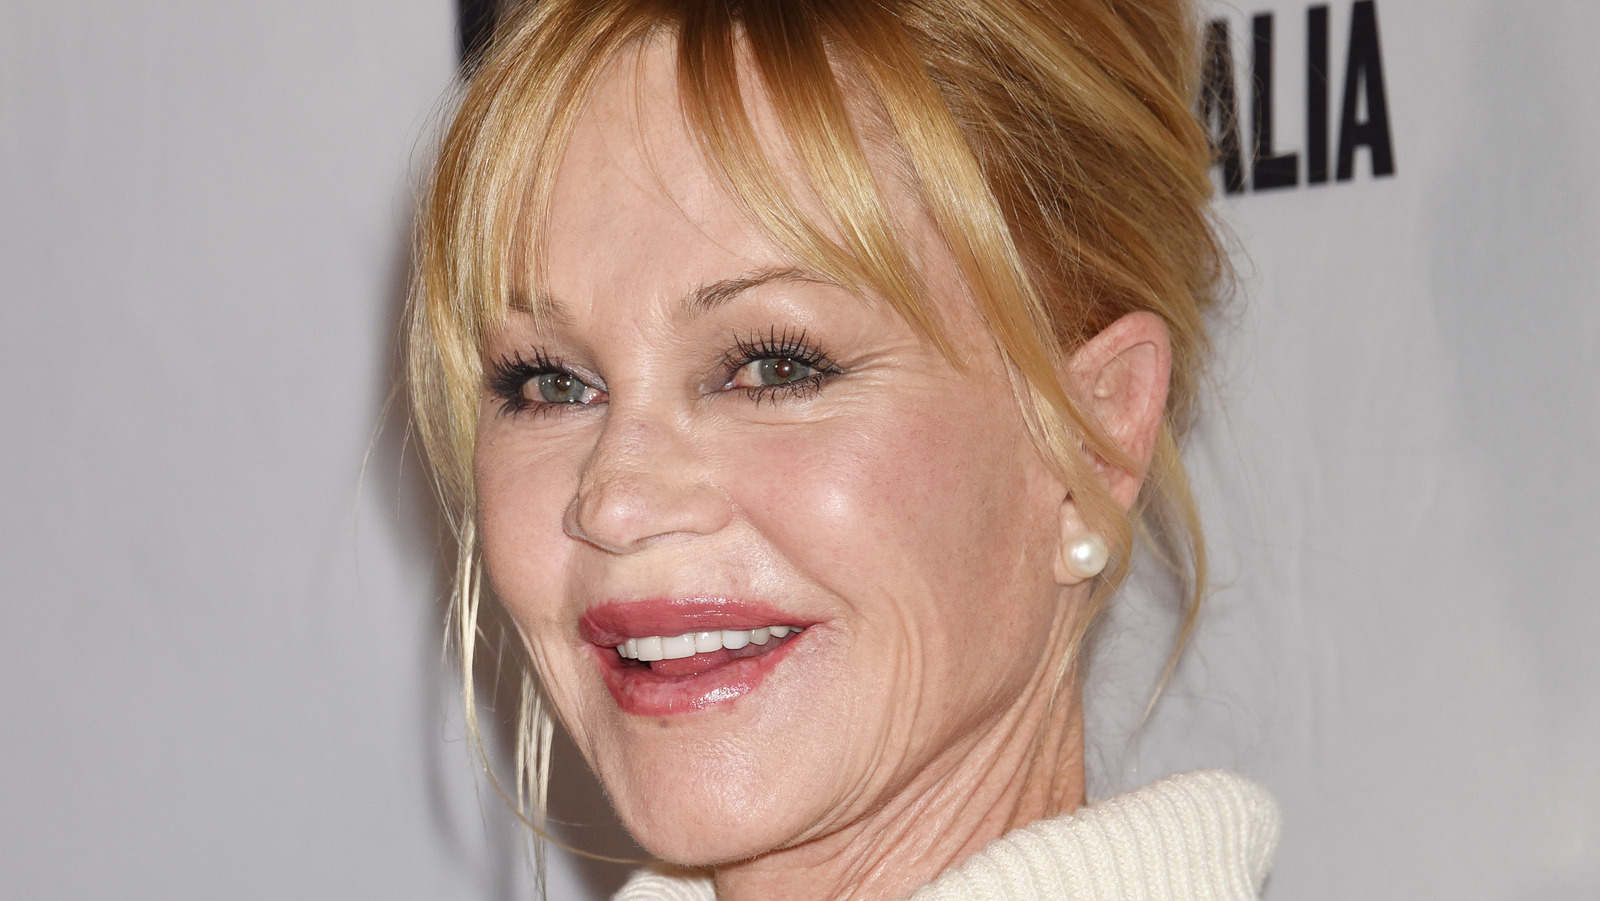 The Truth About Melanie Griffith’s Relationship With Don Johnson